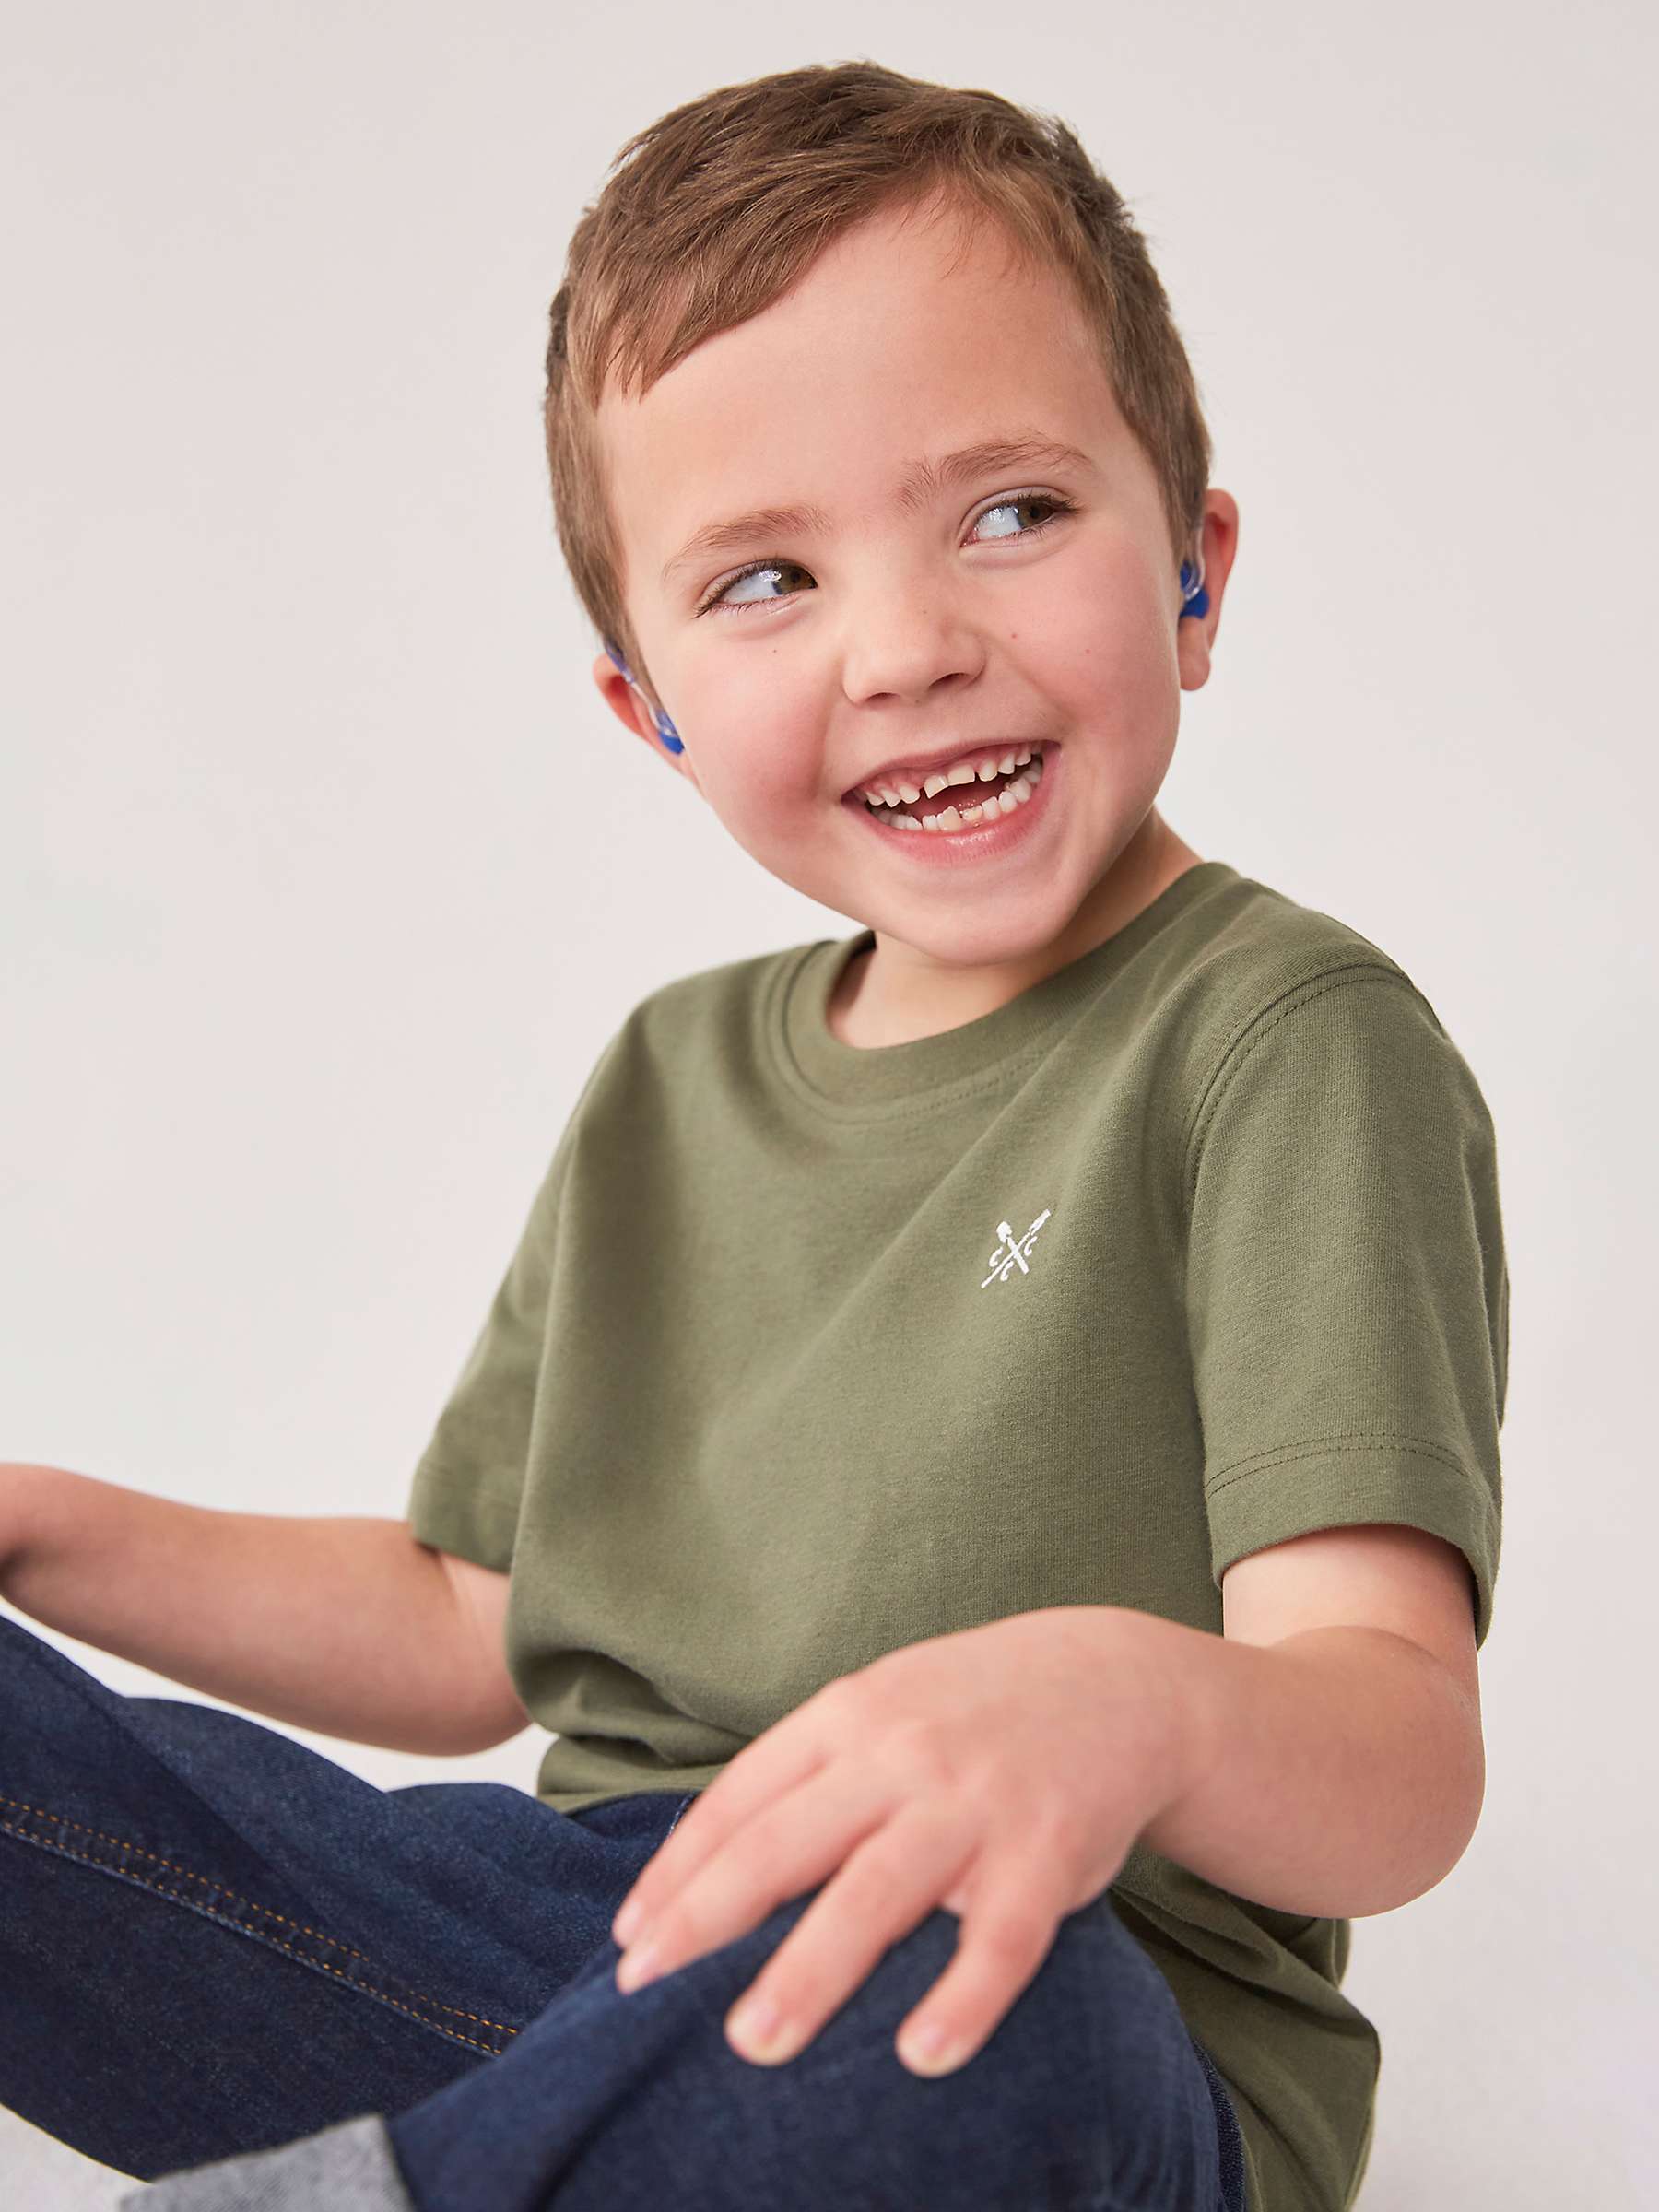 Buy Crew Clothing Kids' Classic T-Shirts, Pack of 2, Khaki/Blue Online at johnlewis.com